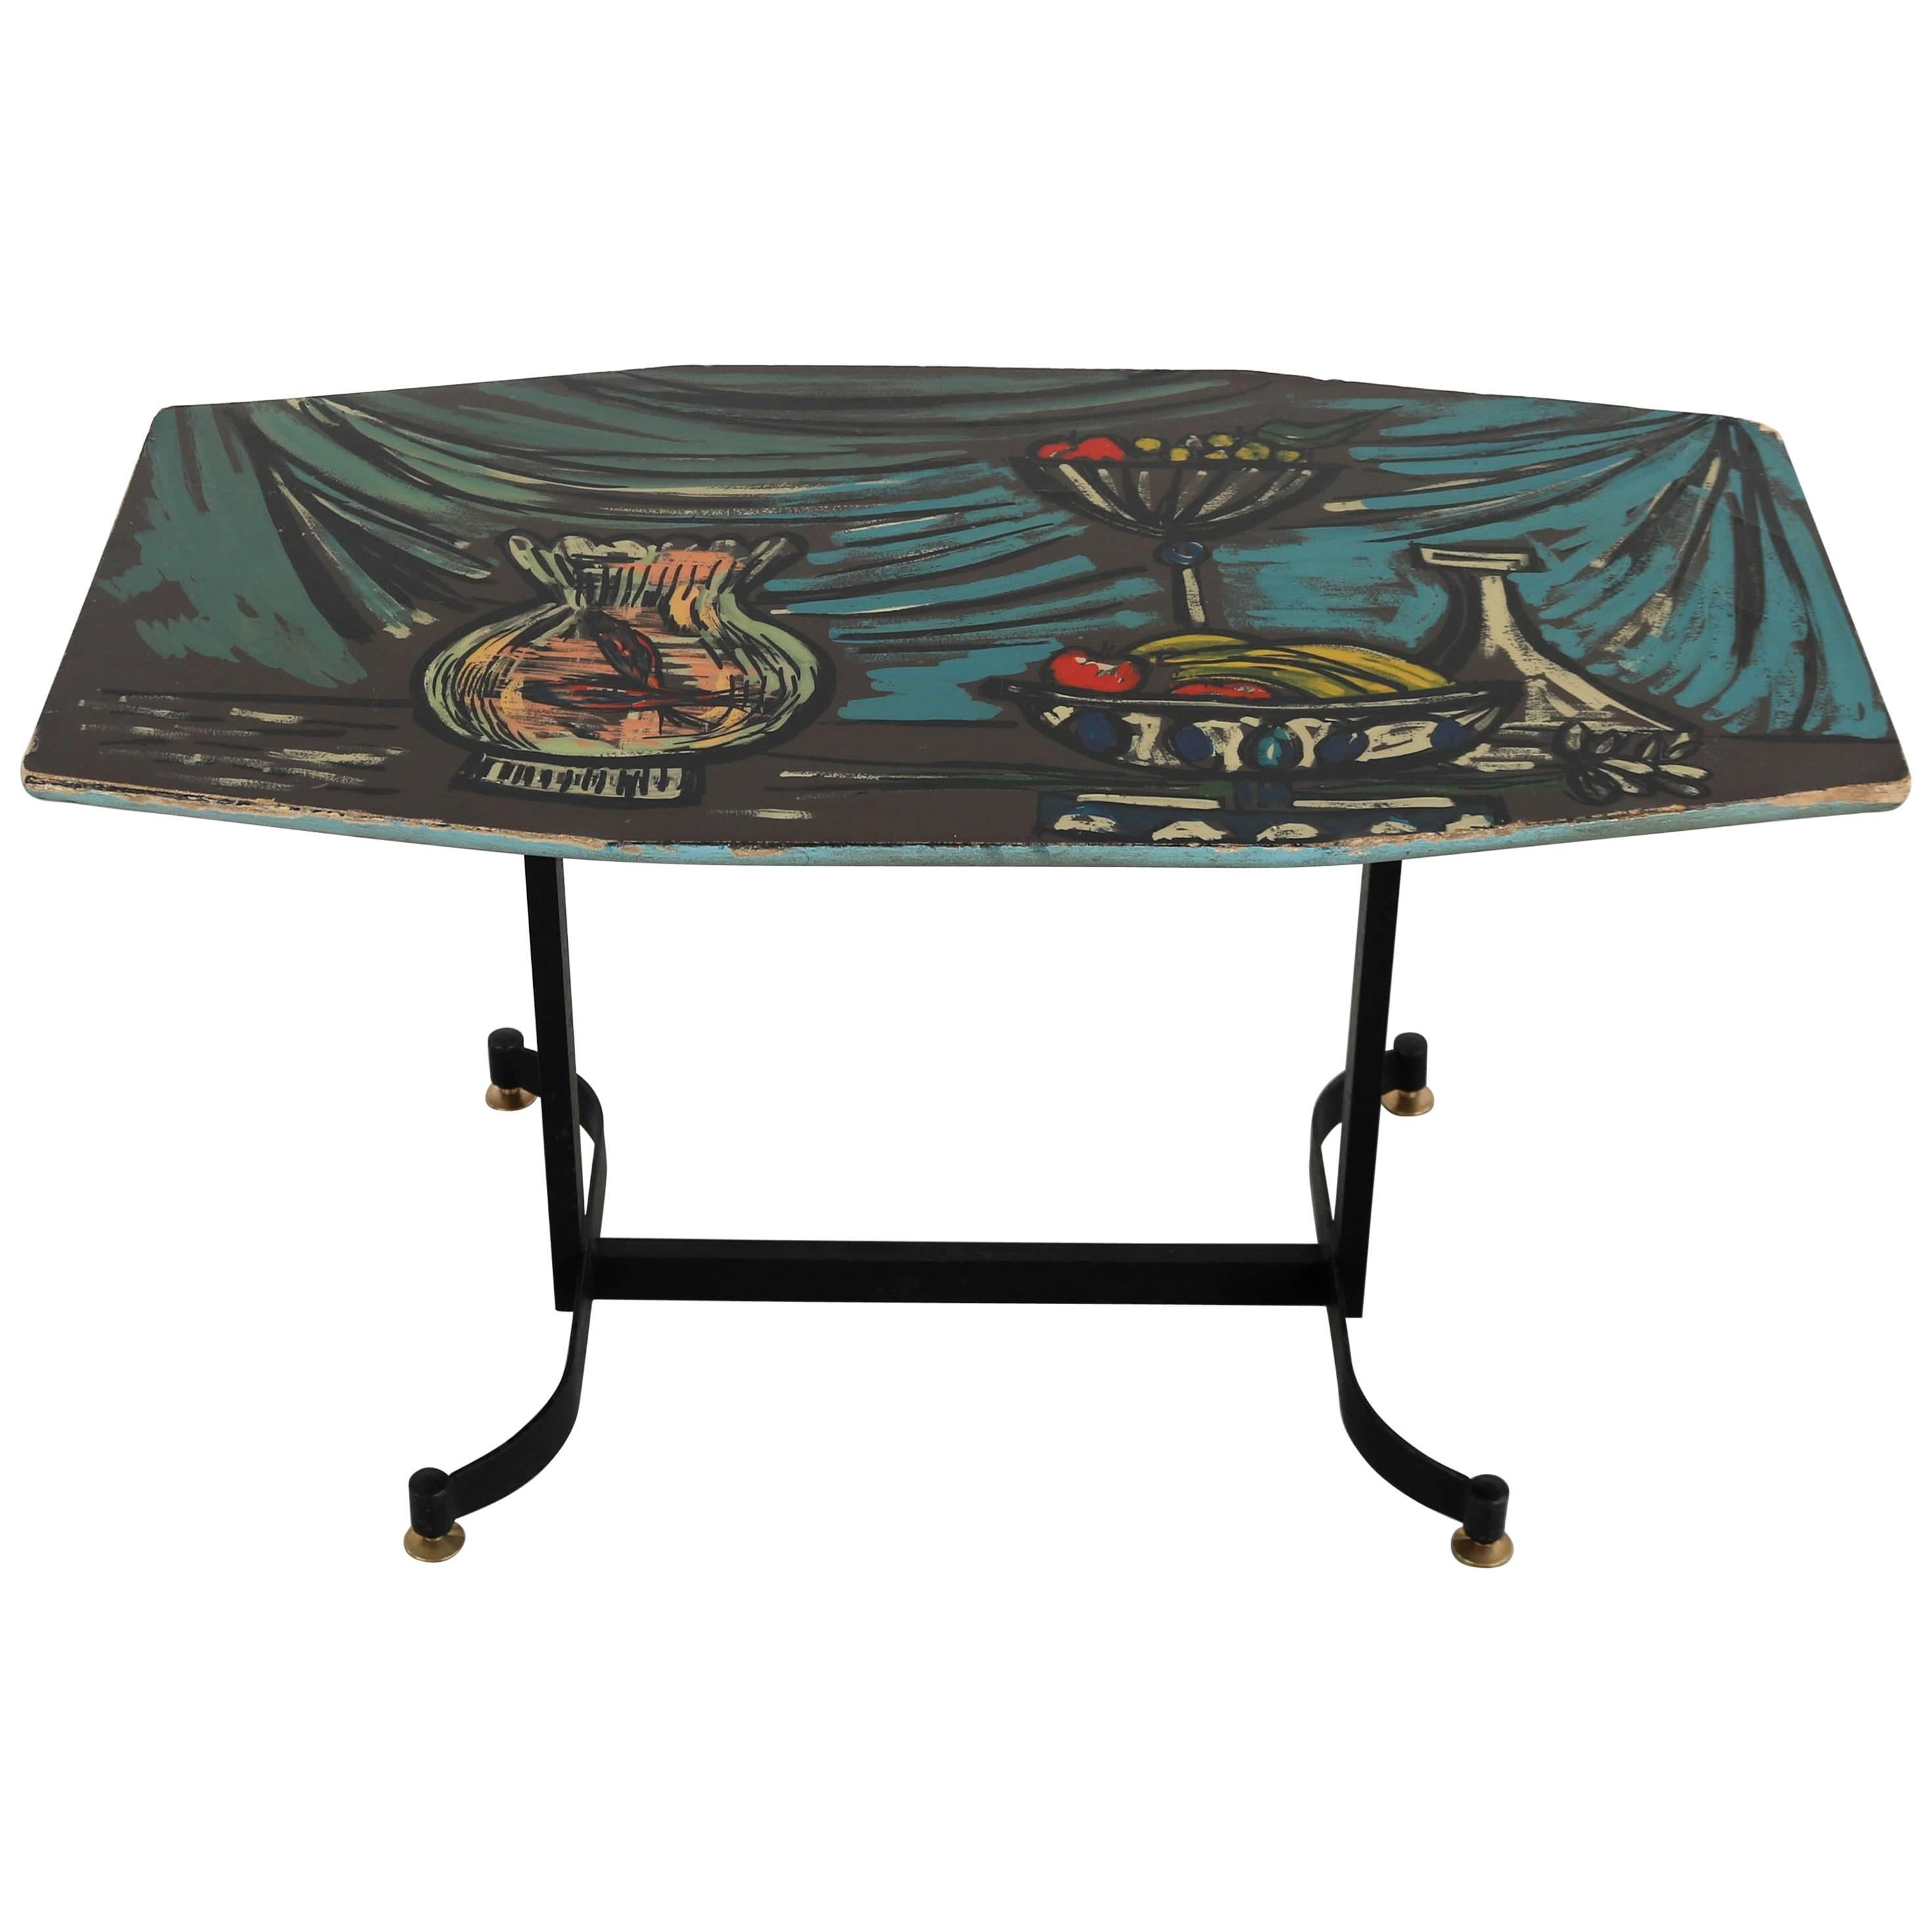 Italian Dark Sofa Table with Colorful Hand-Painted Motives on Table Top, 1950s For Sale